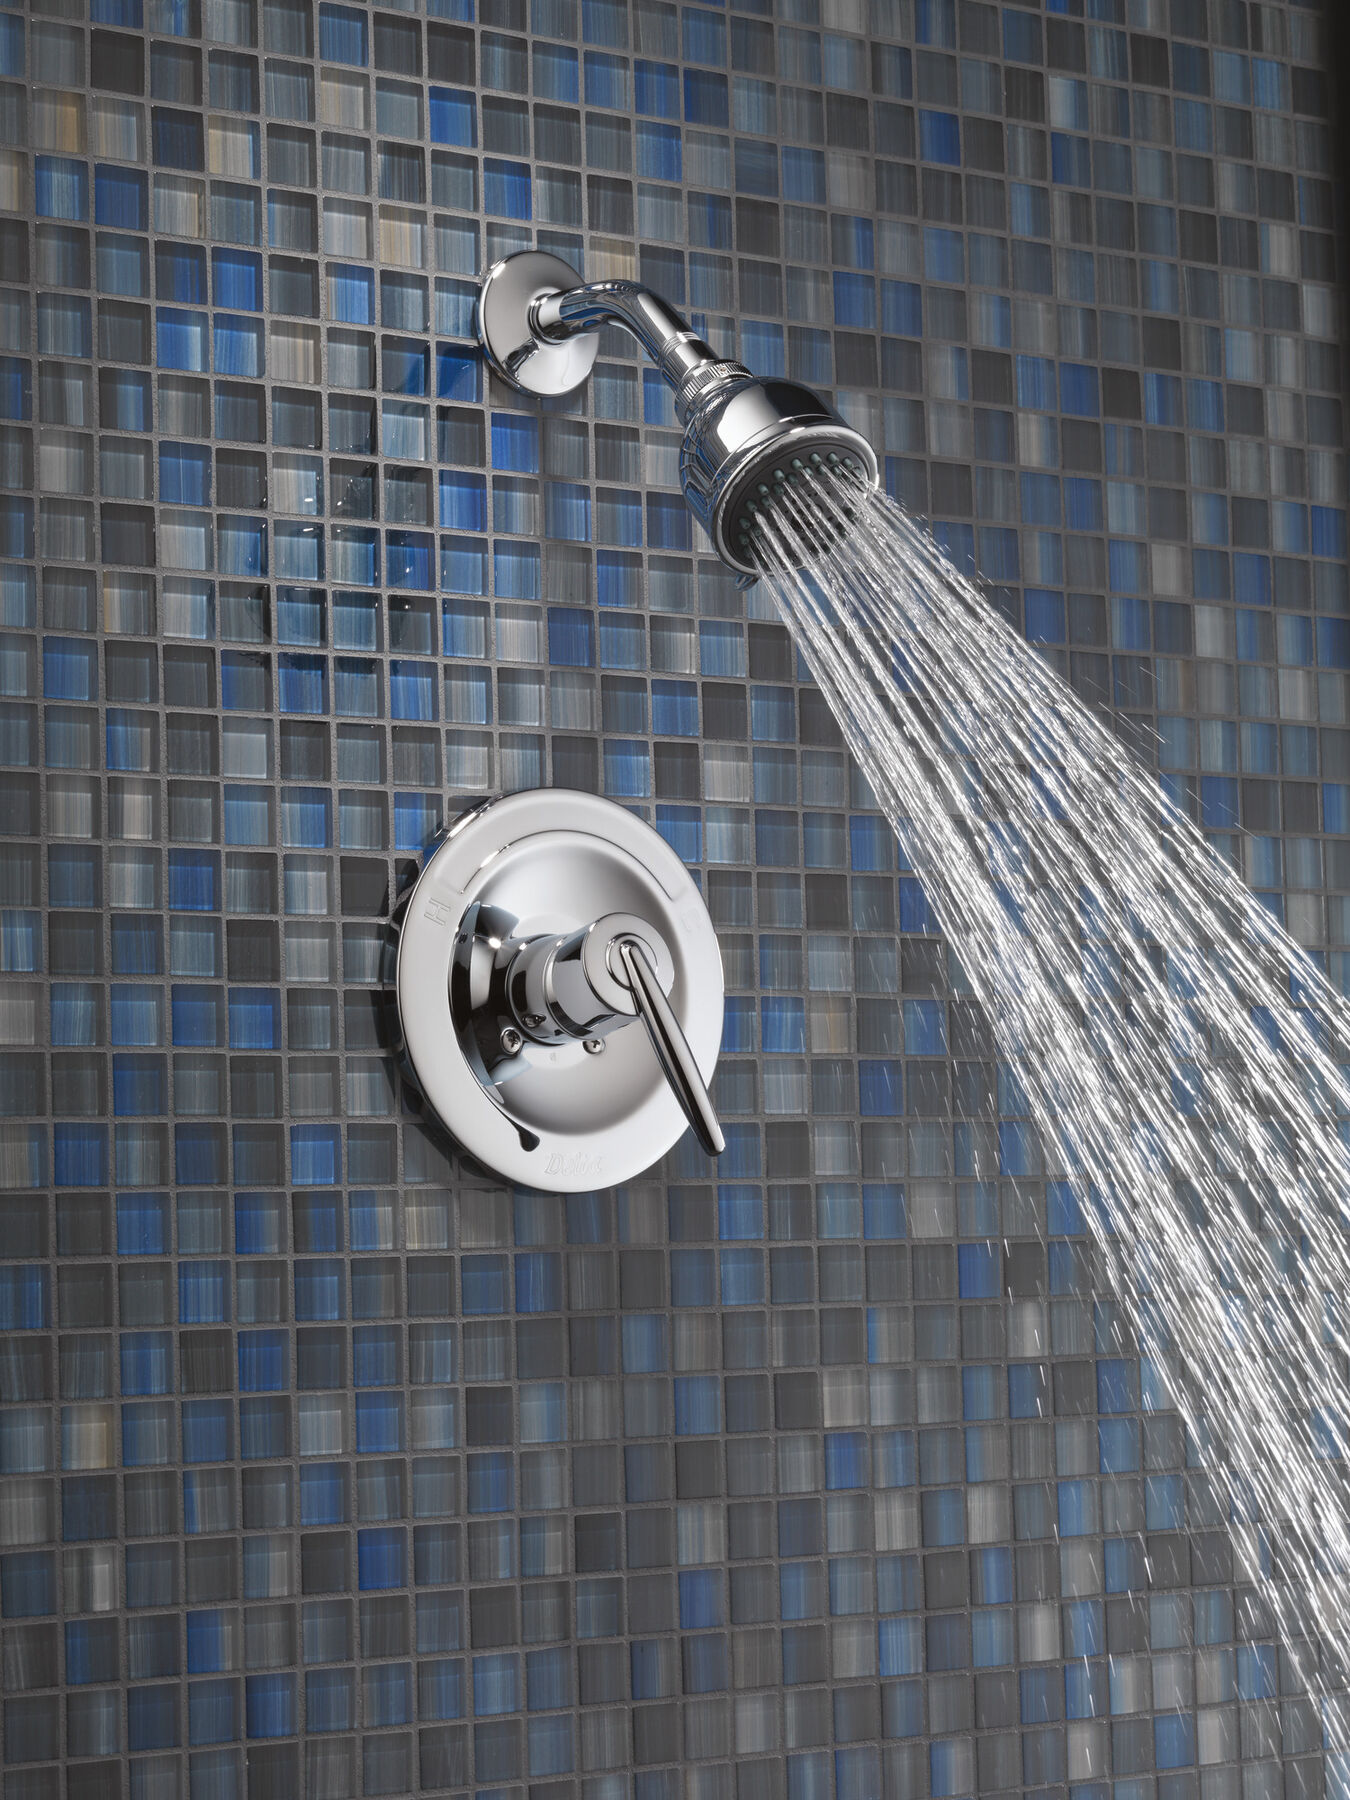 In-Wall Tub and Shower - Stick Handle; with 3-Setting Shower Head Ceramic  Valve System in Chrome 25275-LA